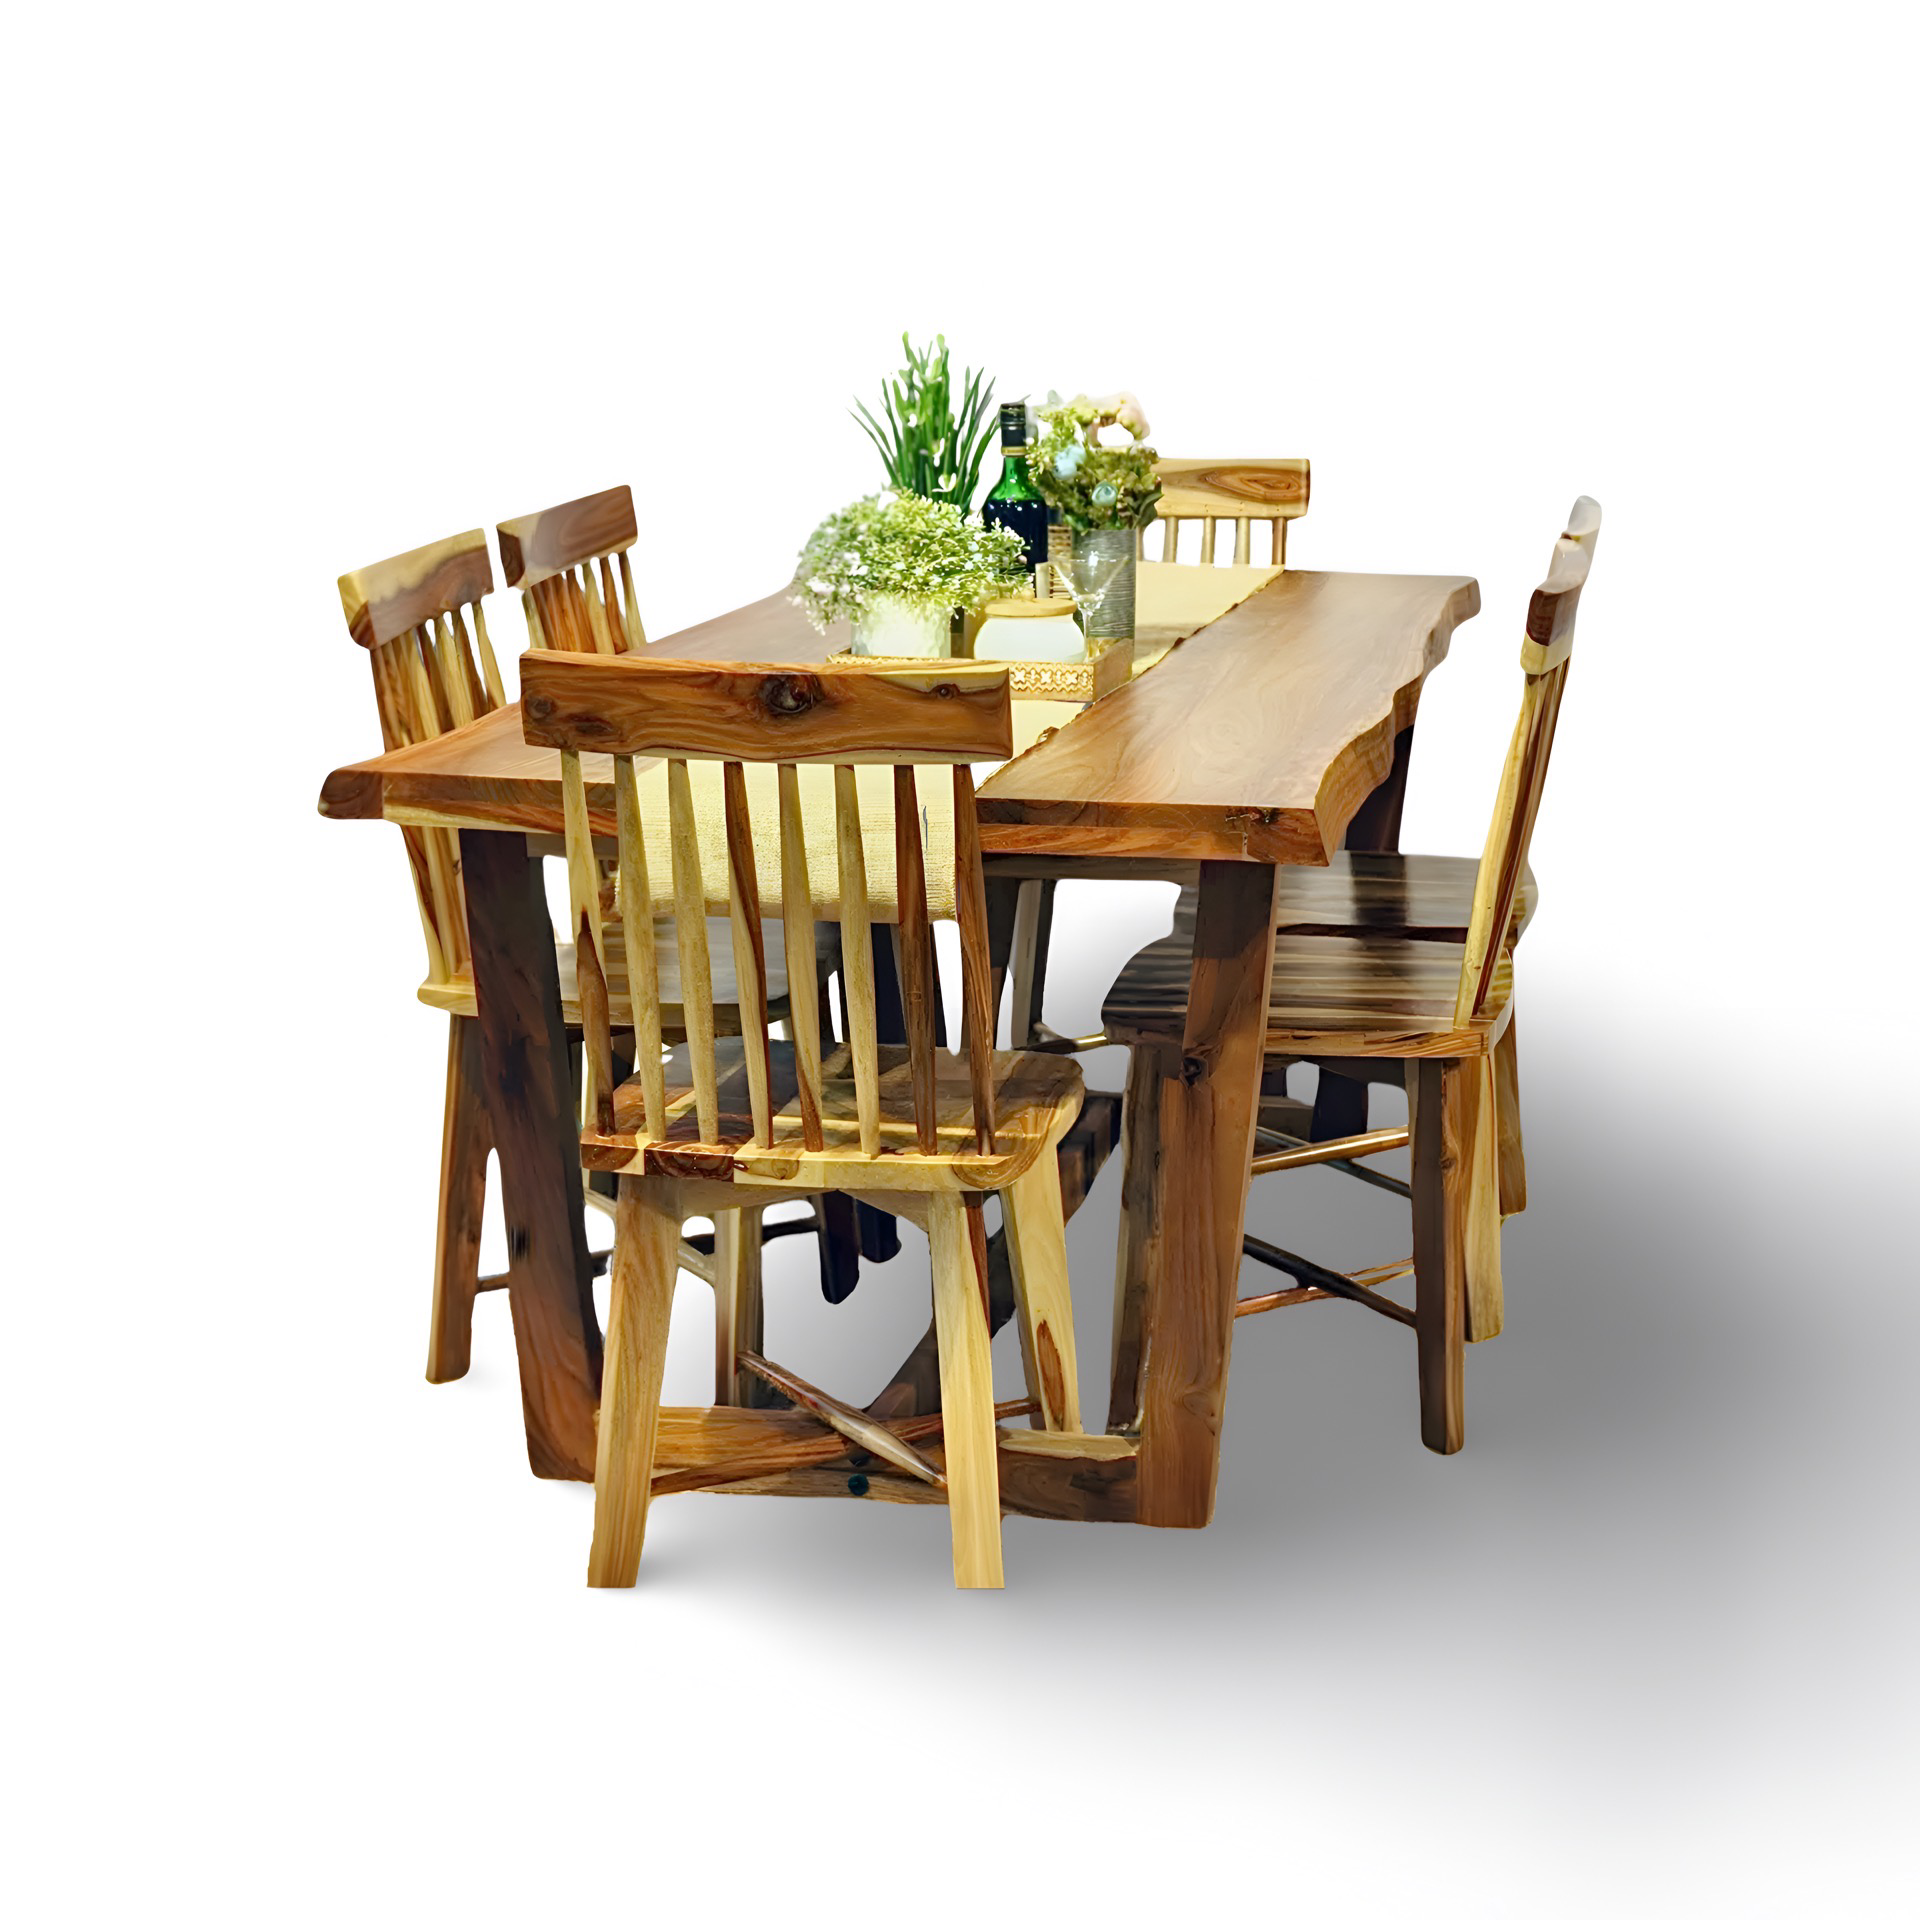 Elevate your dining room with Our sheesham wood made Alexa Live edge Dining Table Set with designer chairs. Buy Luxury six seater dining table today !